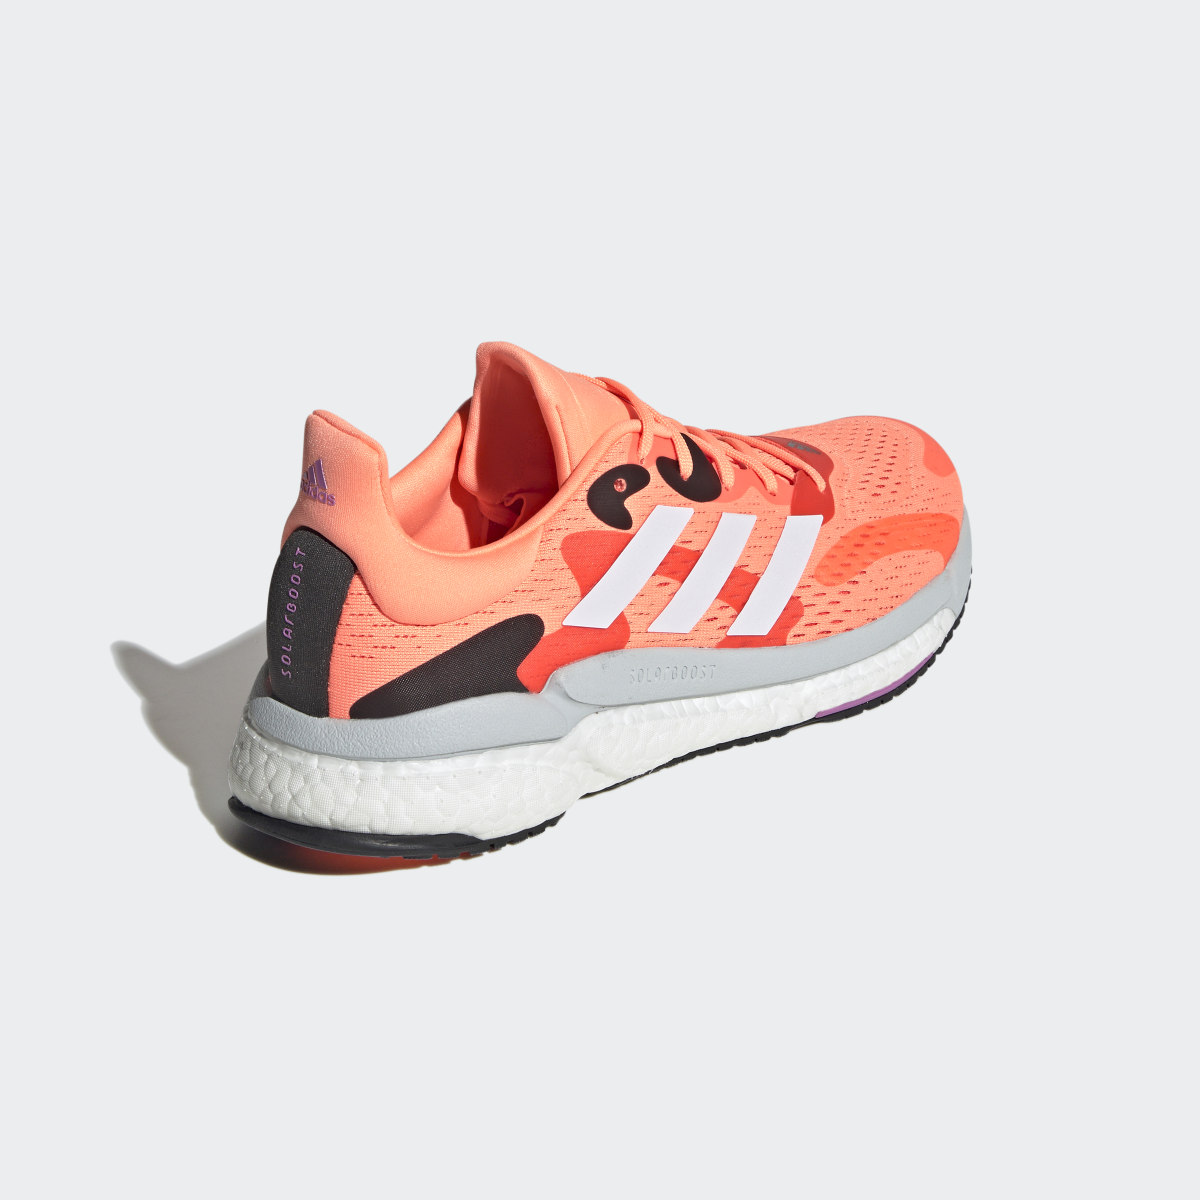 Adidas Solarboost 4 Shoes. 6